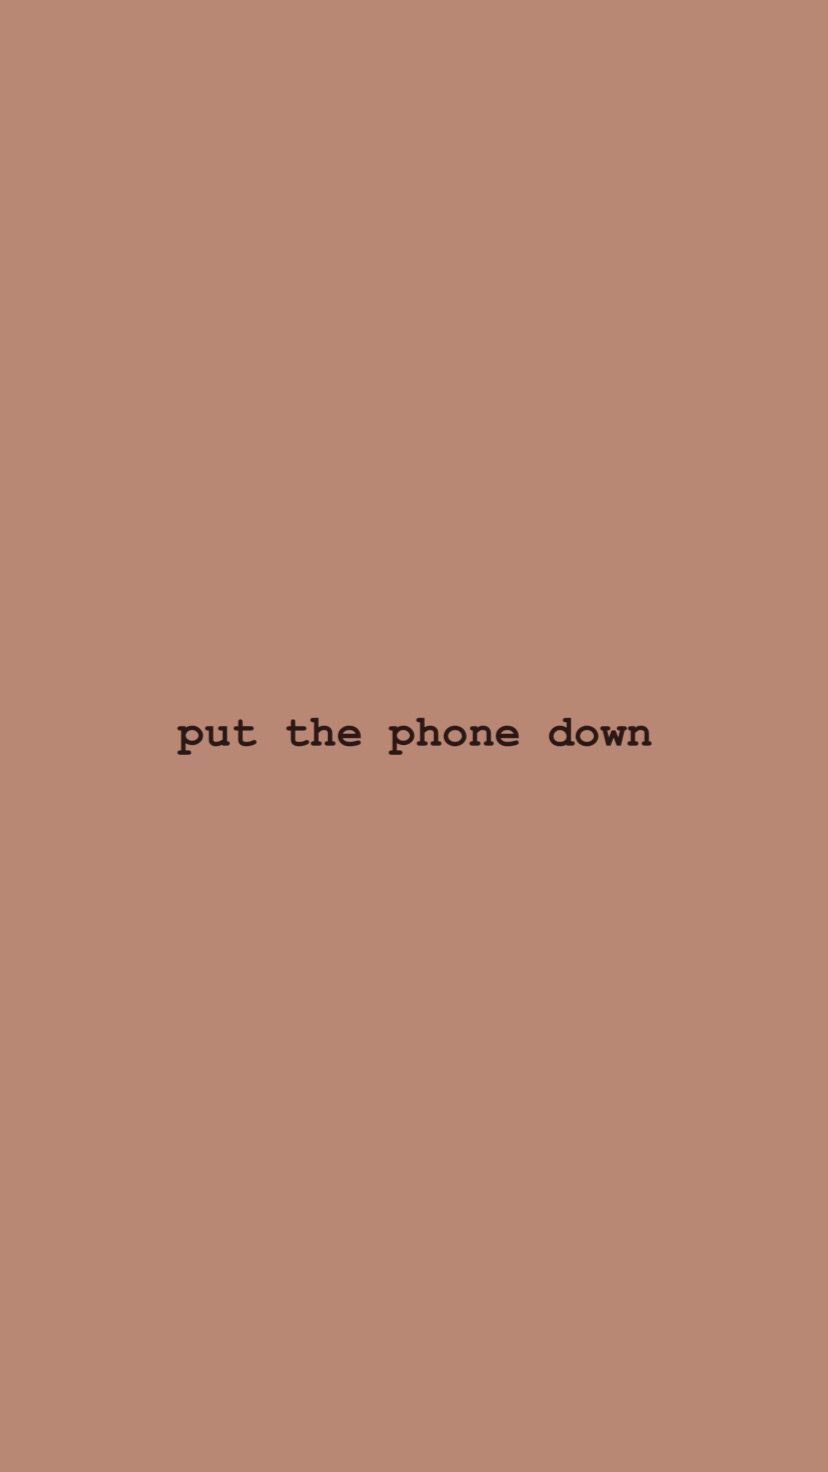 Put the phone down. Dont touch my phone wallpaper, Pretty wallpaper iphone, Funny phone wallpaper